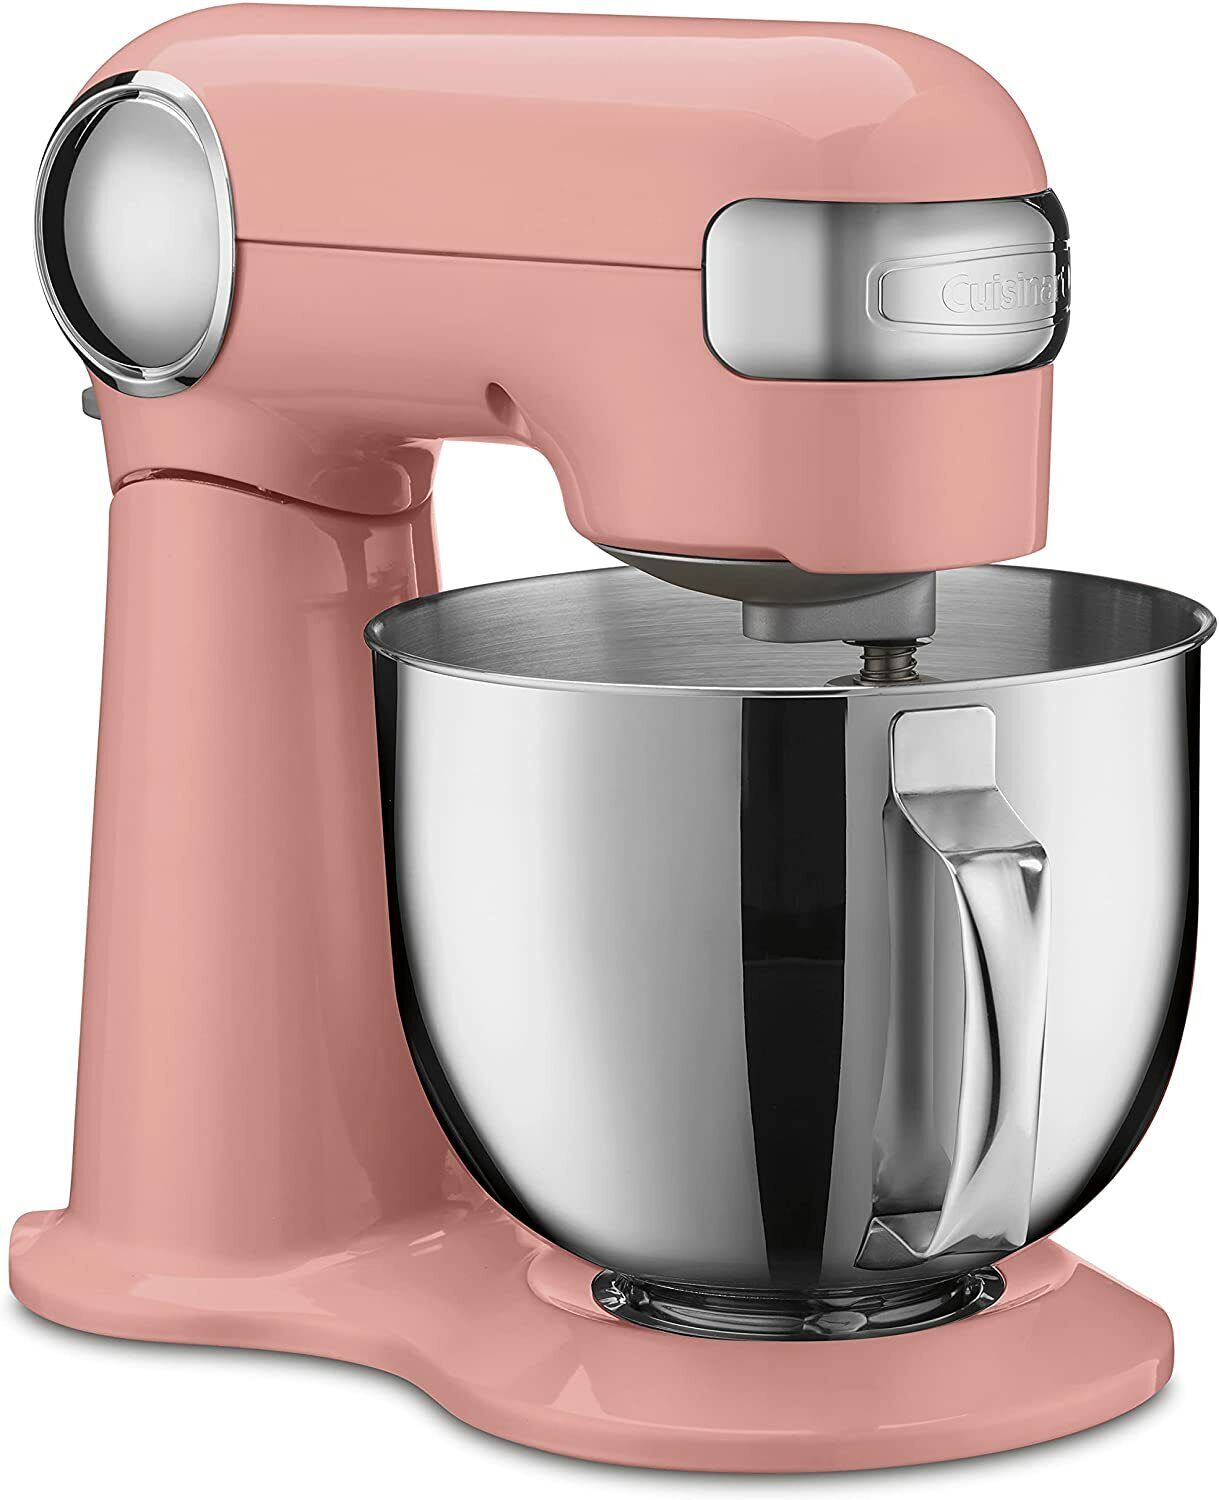 Cuisinart Precision Master 5.5-Quart 12-Speed Stand Mixer - Blushing Coral